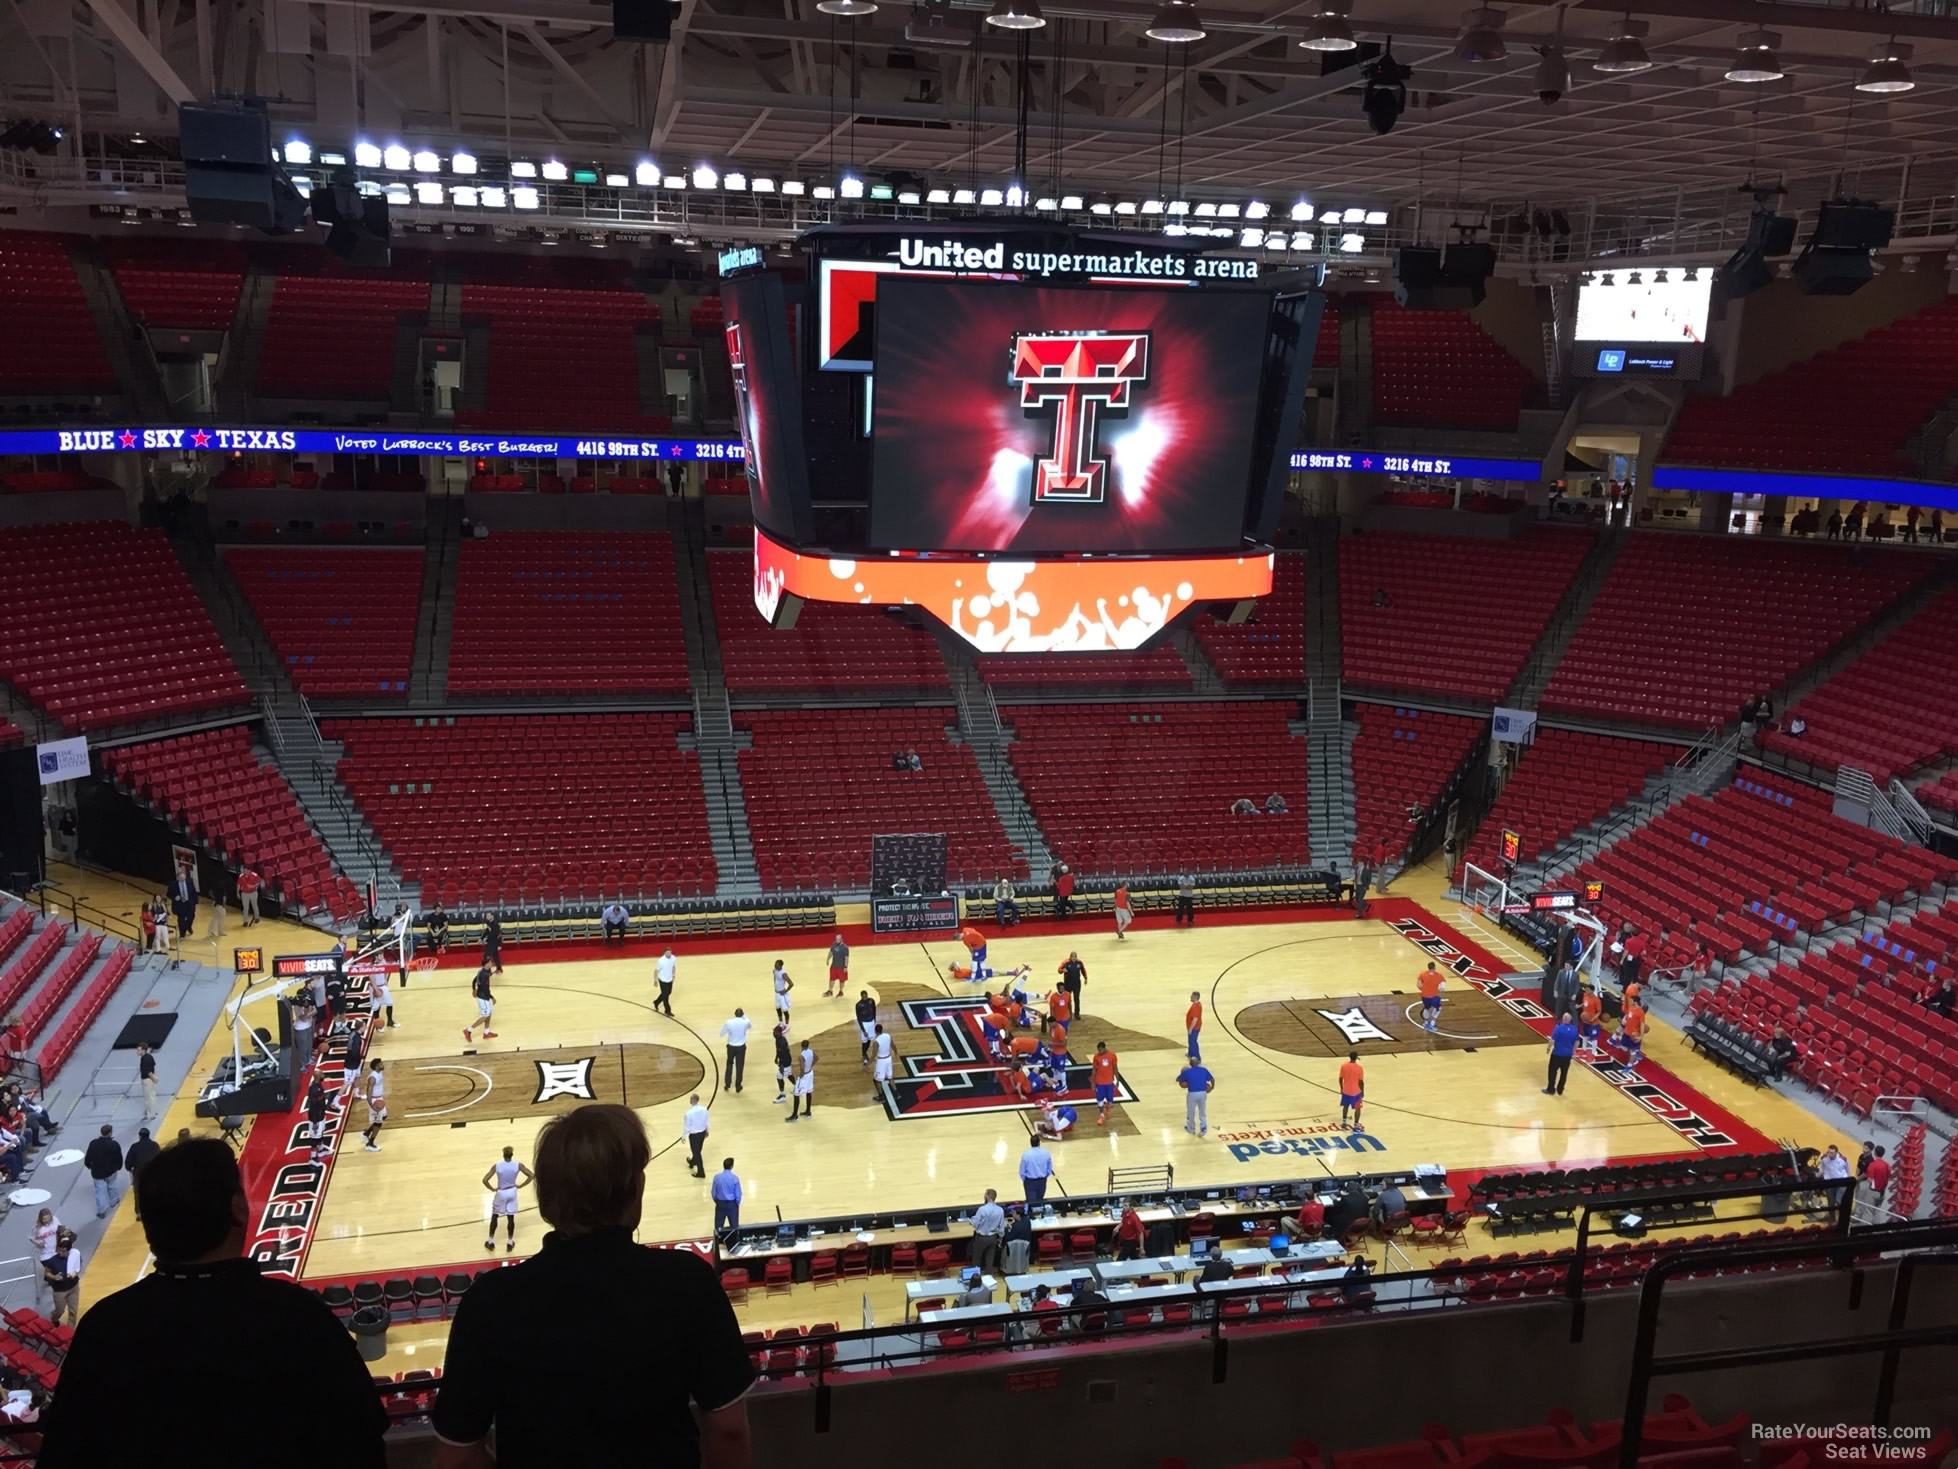 section 218, row 7 seat view  - united supermarkets arena